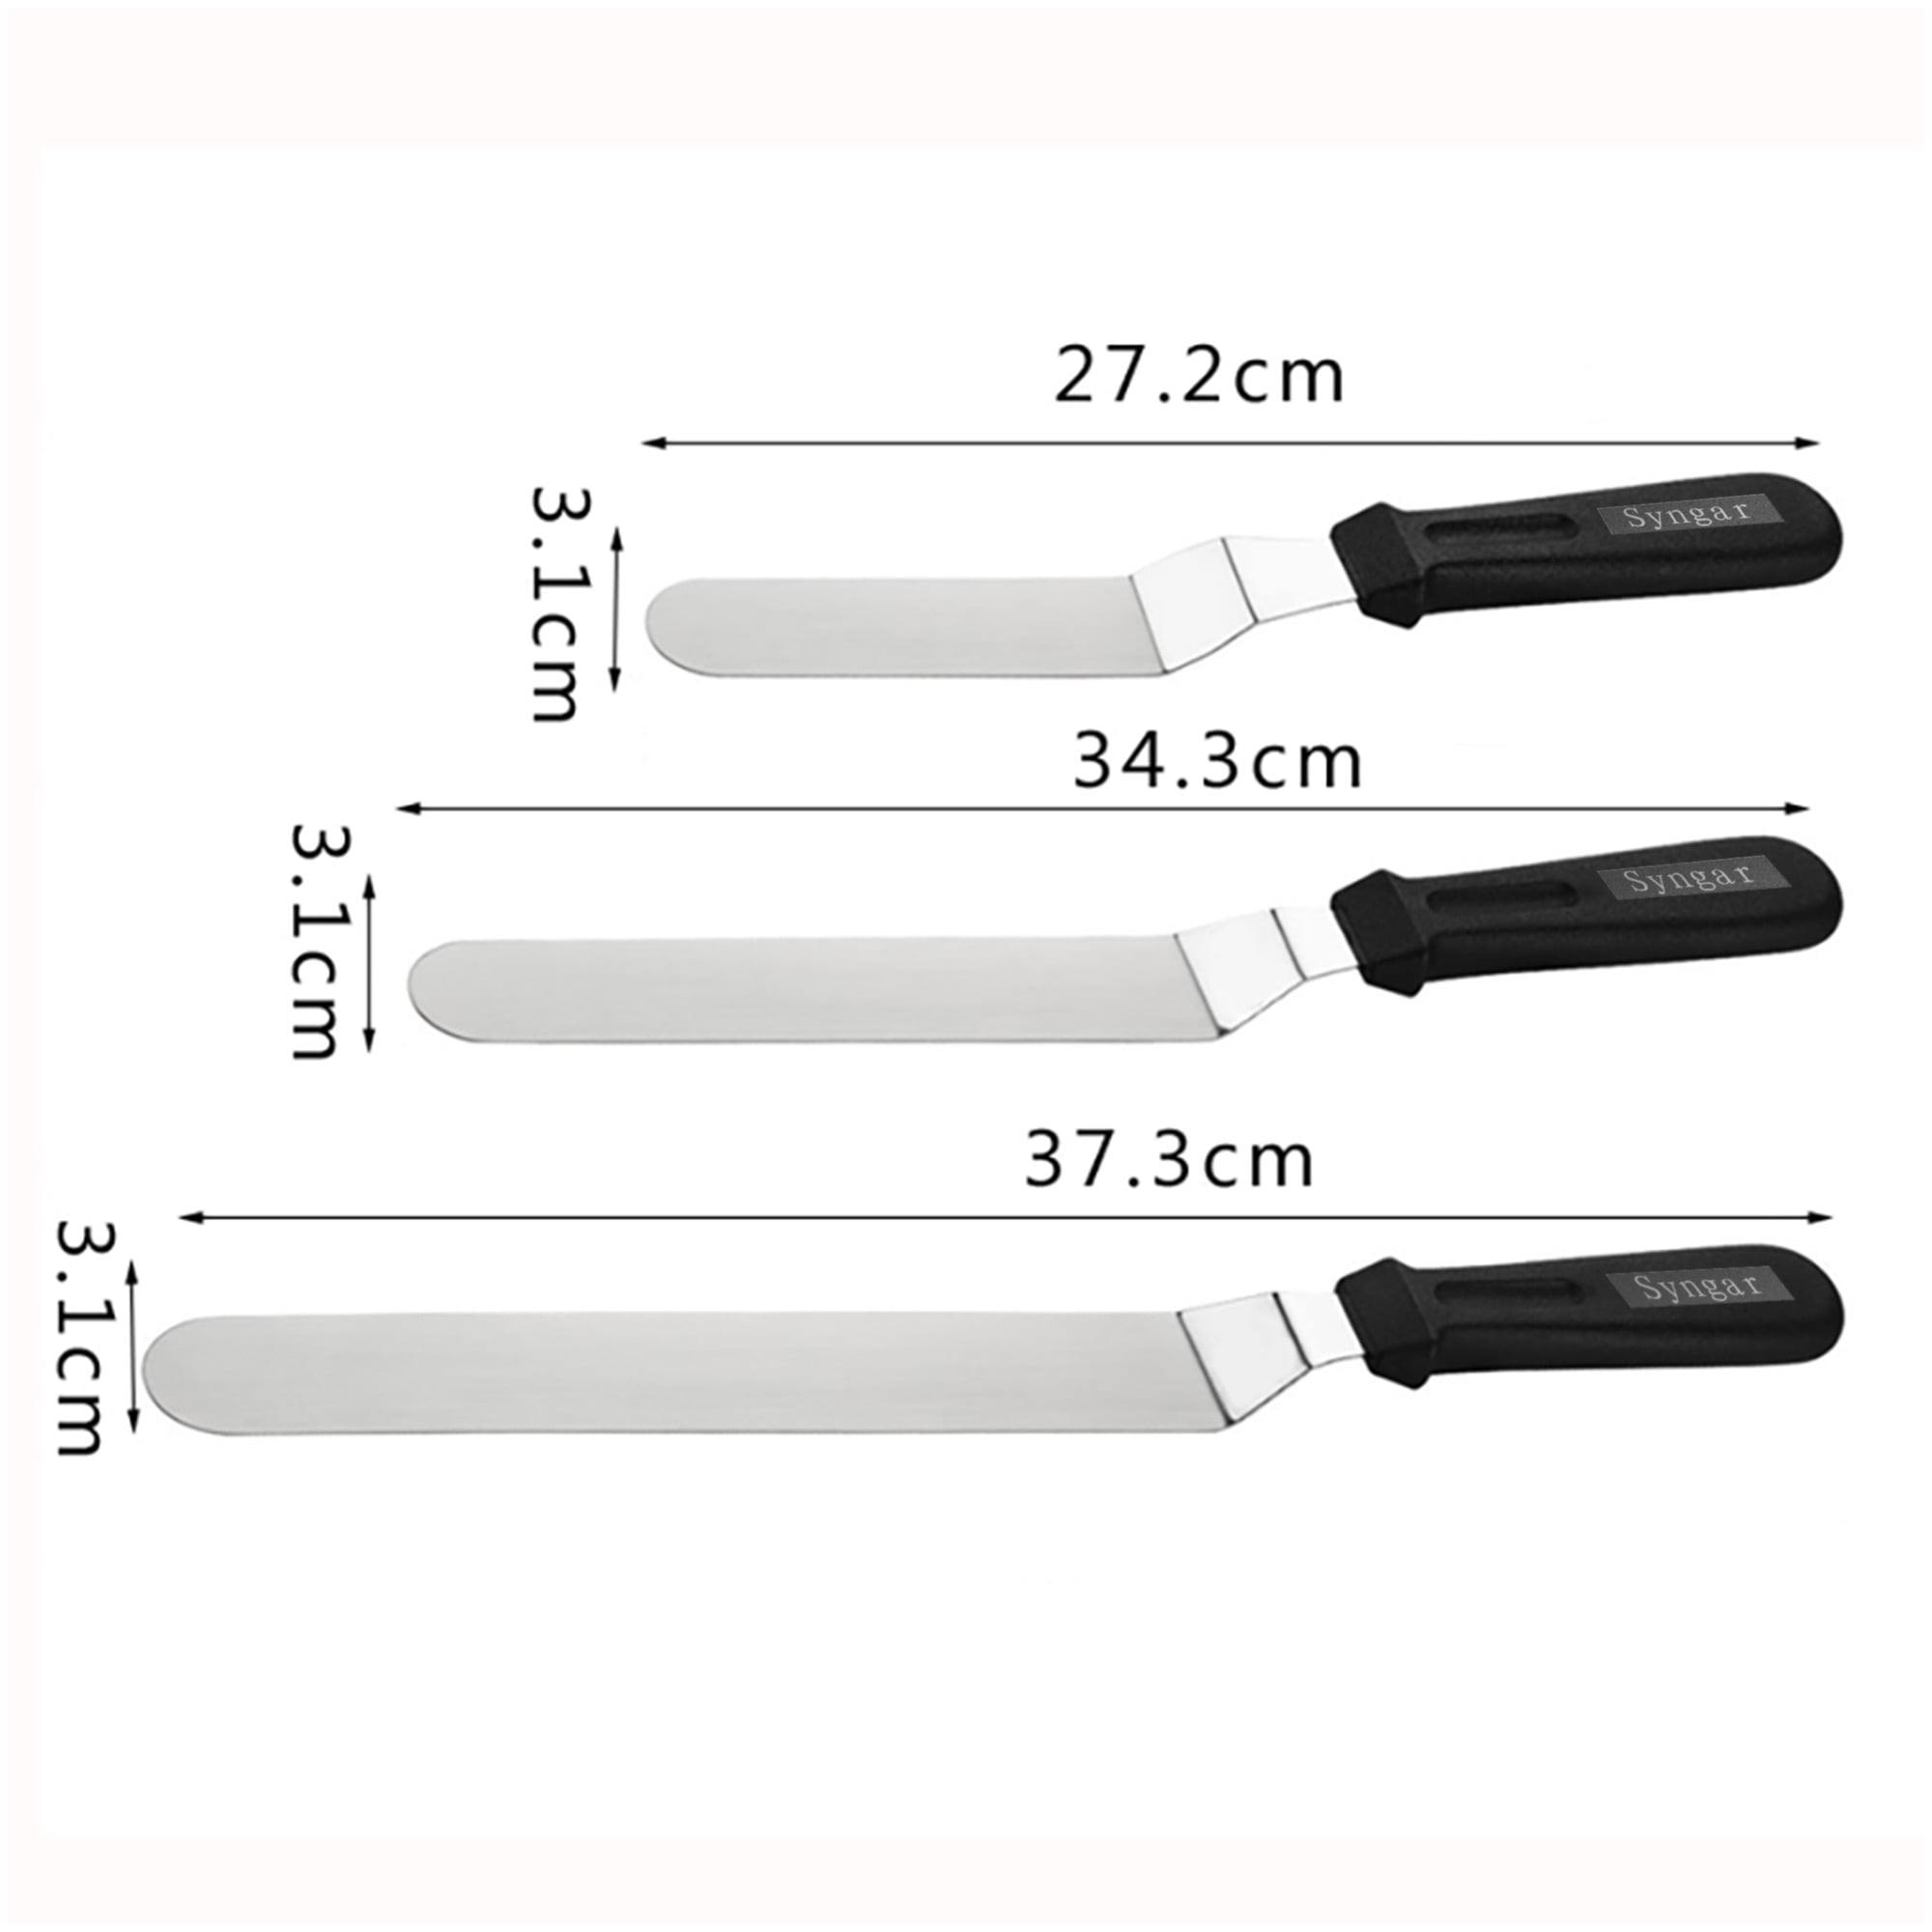 Icing Spatula Metal Stainless Steel for Kitchen Cake Baking Decorating,Sorxine Angled Icing Spatula Set of 3 with 6, 8, 10 Blade (Black)